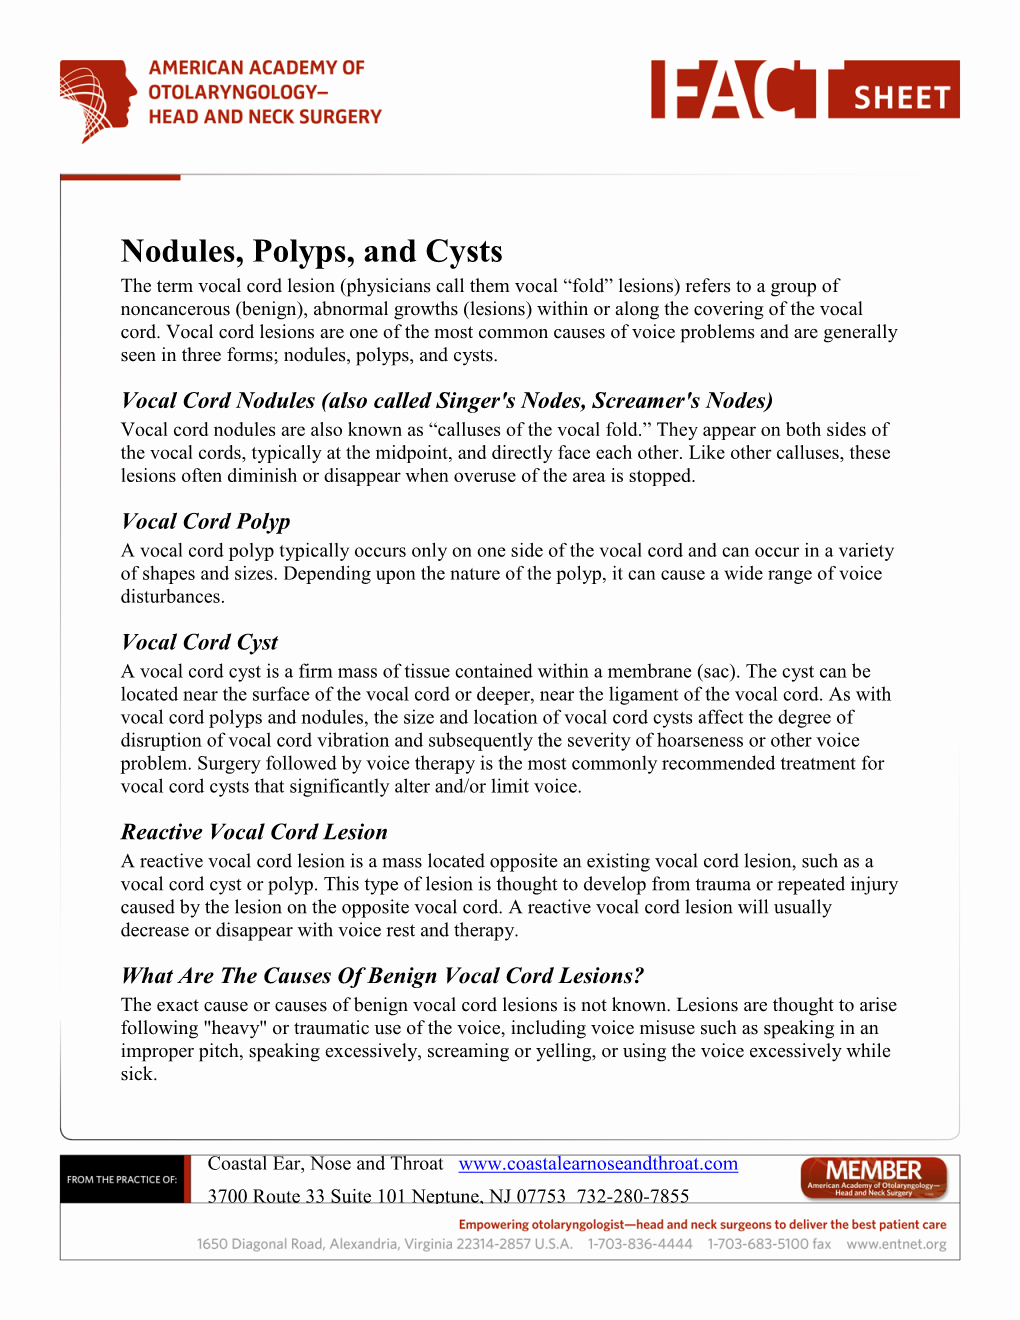 Nodules, Polyps, and Cysts